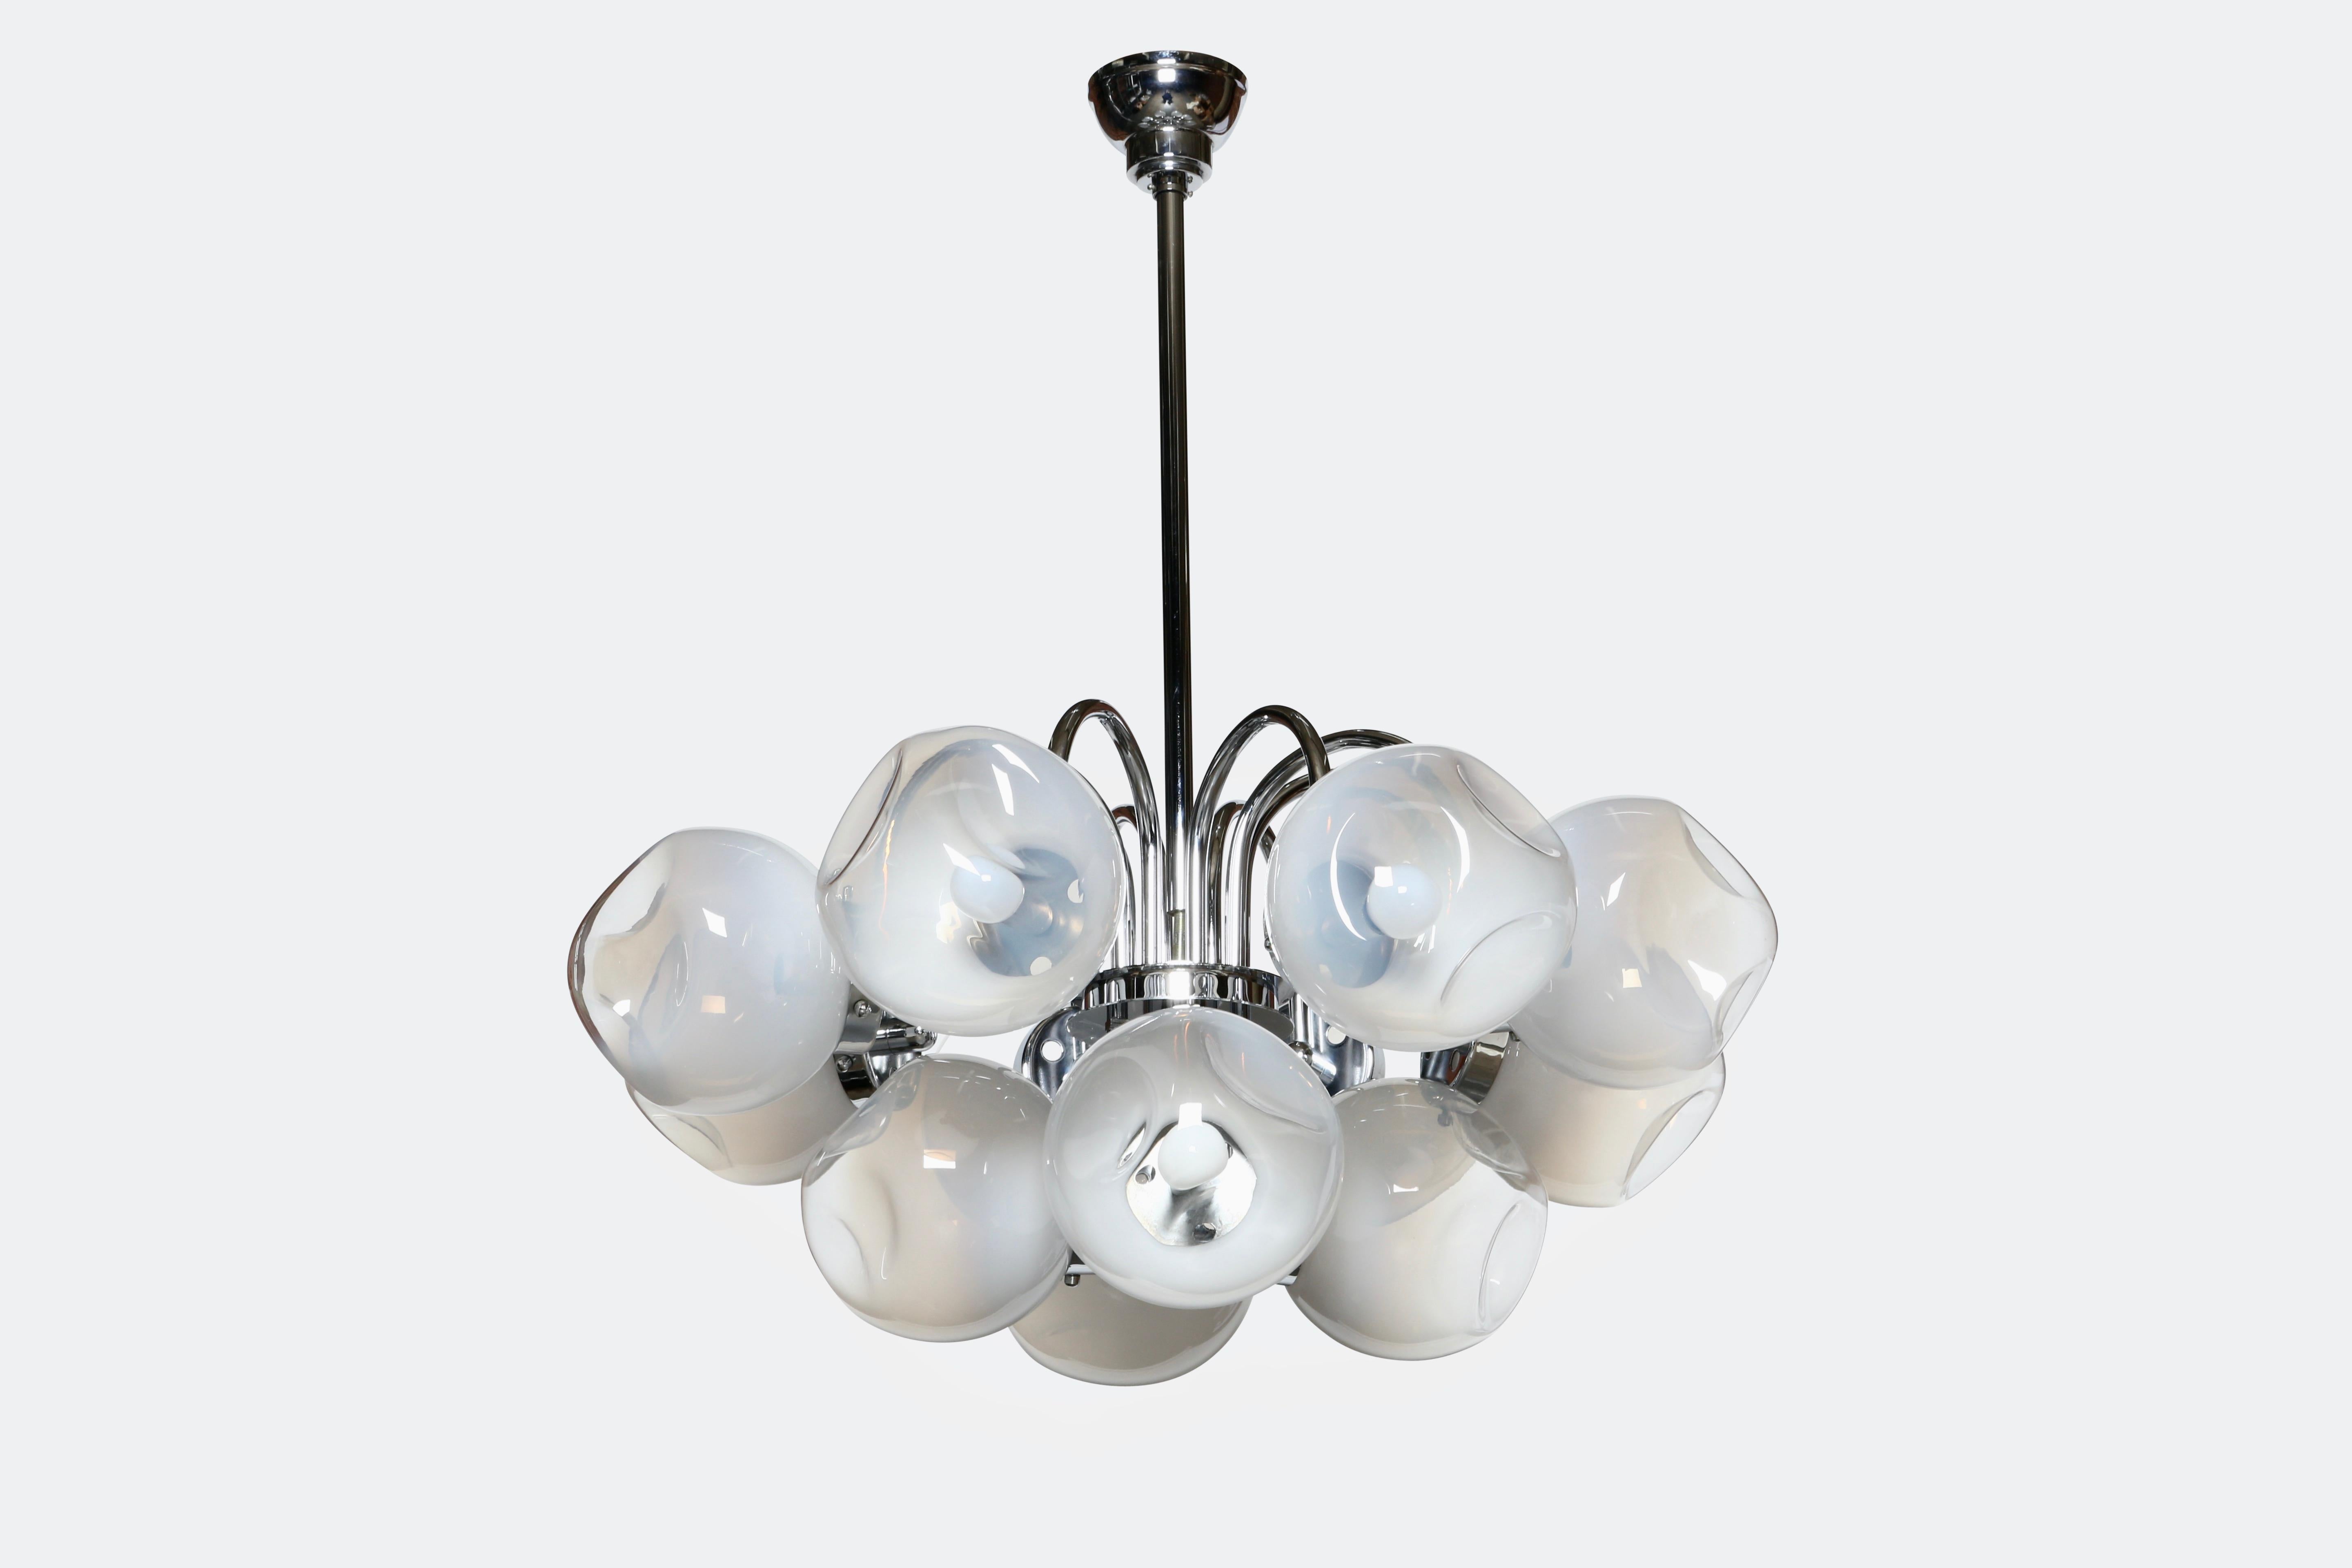 Carlo Nason chandelier.
Italy 1970s.
Murano glass, chrome-plated metal.
12 candelabra sockets.
Complimentary US rewiring upon request.

We take pride in bringing vintage fixtures to their full glory again.
At Illustris Lighting our main focus is to